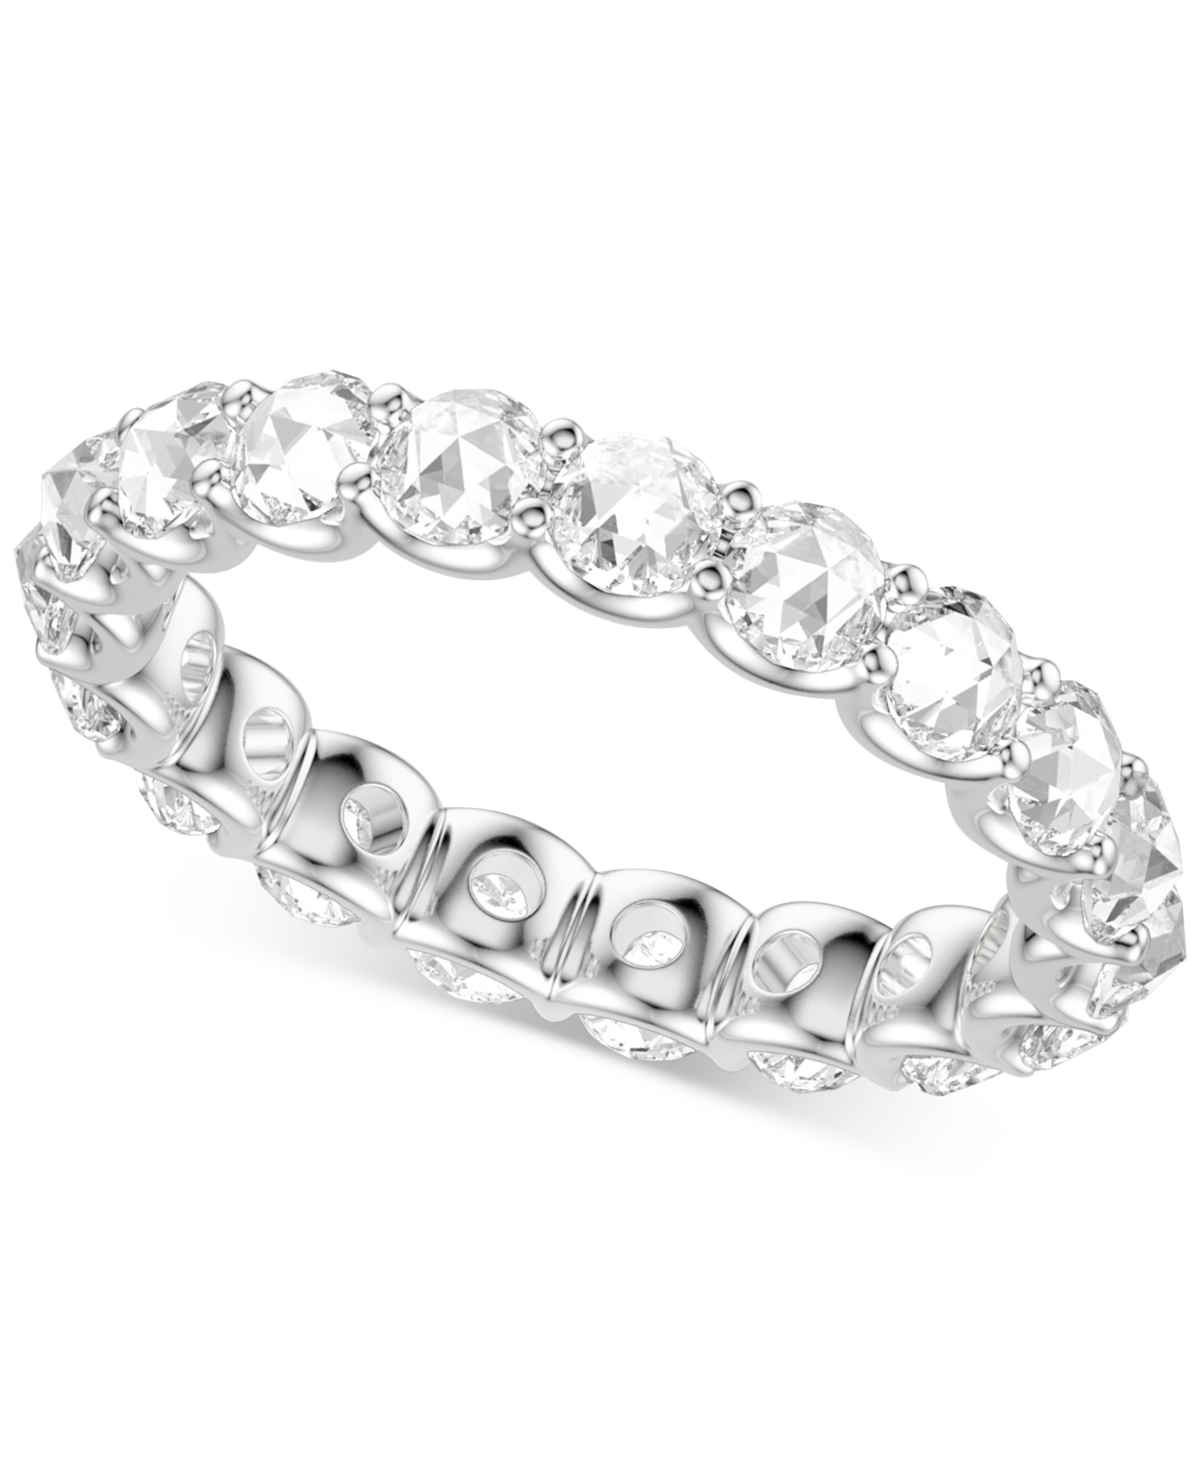 Artcarved Art Carved Diamond Rose-Cut Eternity Band (1-7/8 ct. t.w) in 14k White Gold